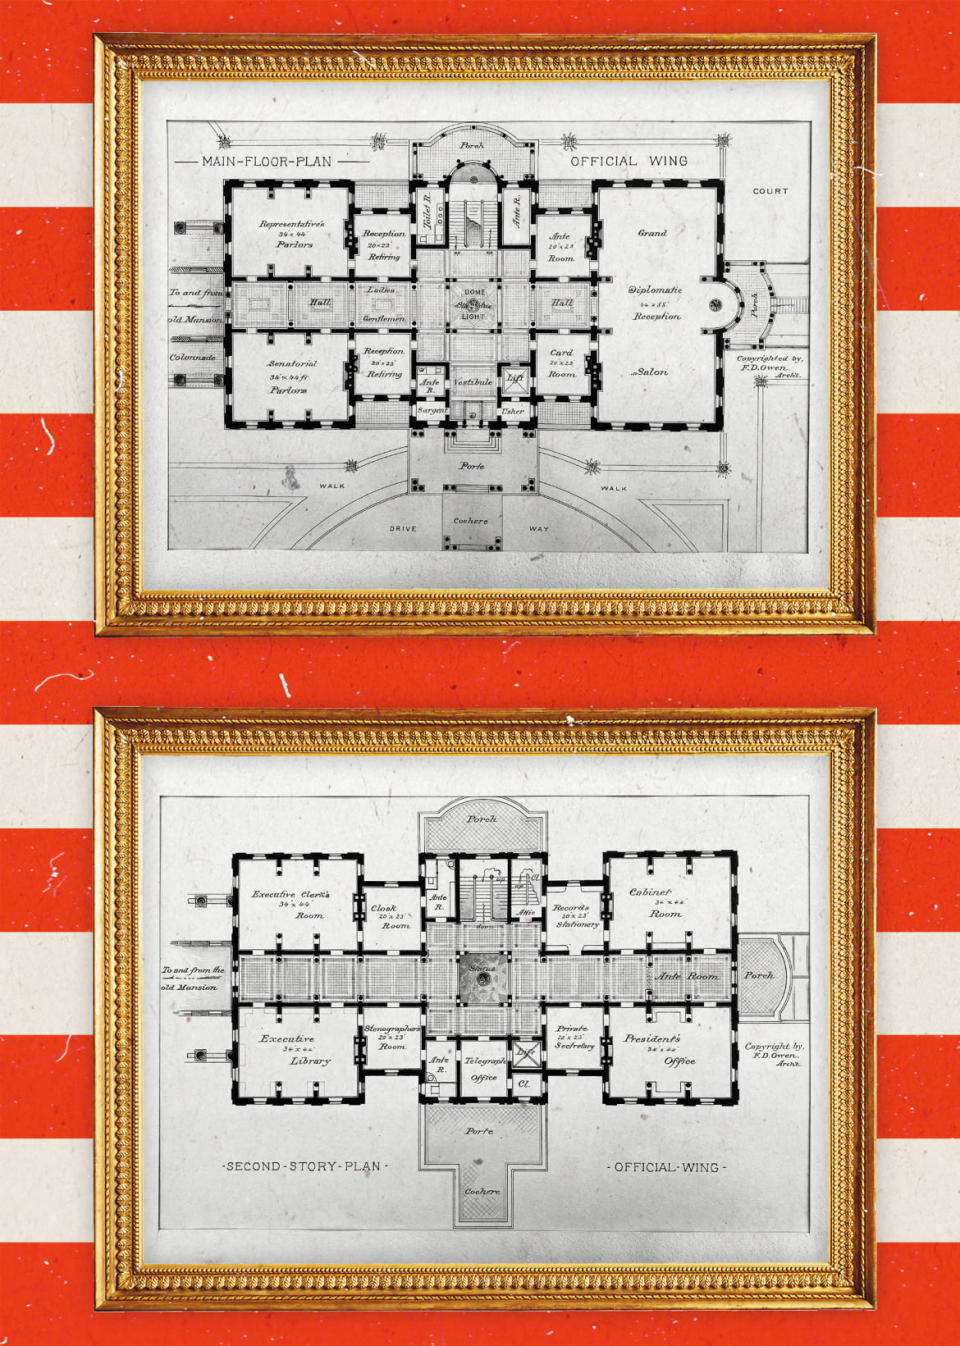 <div class="inline-image__caption"><p>The floor plans of the official wing.</p></div> <div class="inline-image__credit">Library of Congress</div>